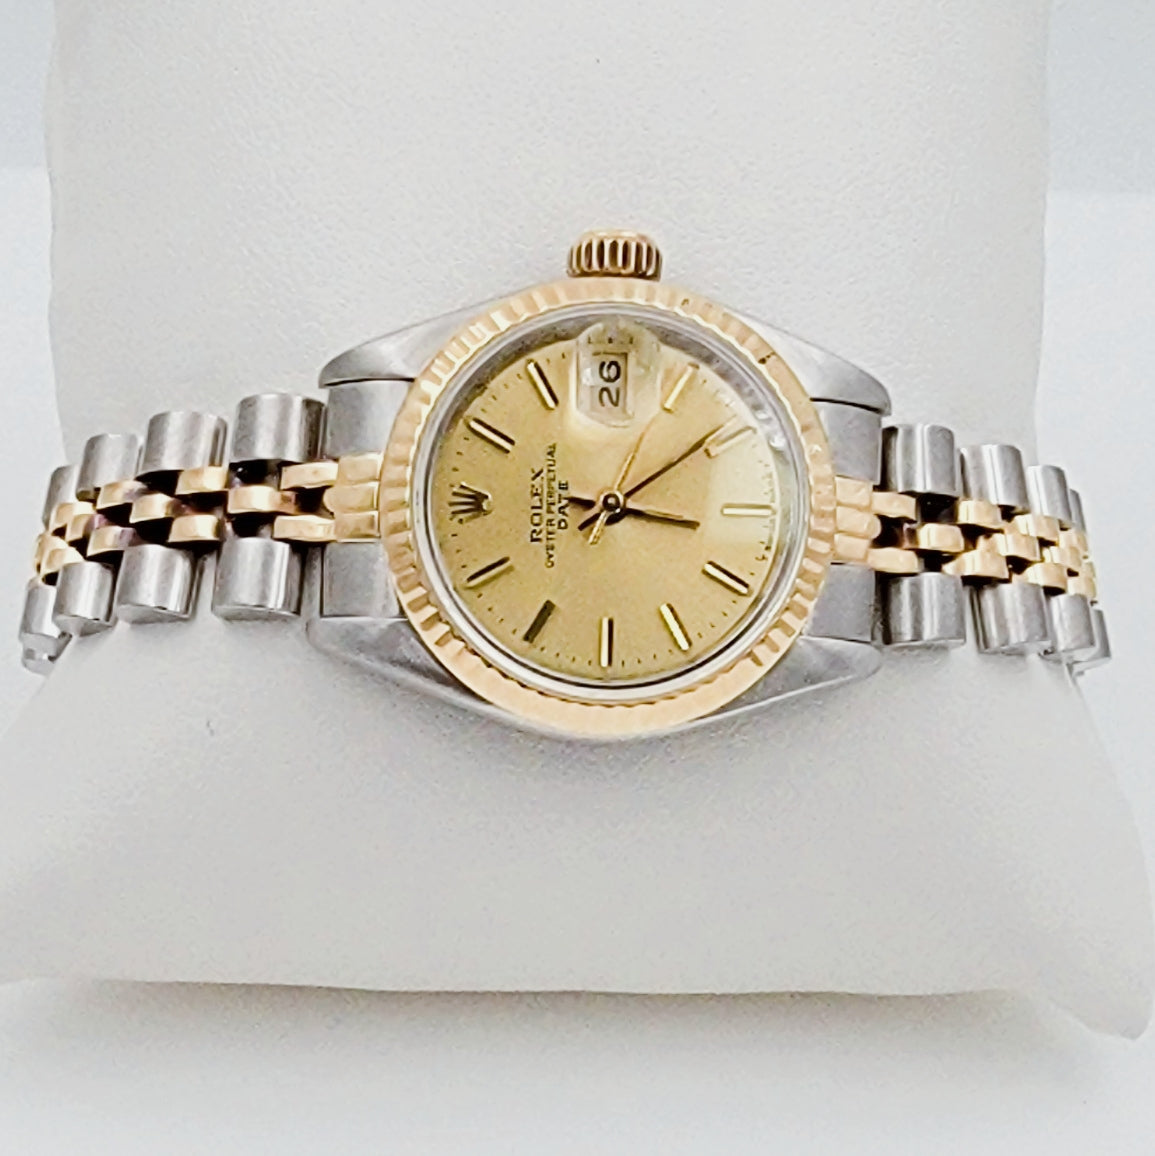 Ladies Rolex 26mm Date Two Tone 18K Yellow Gold / Stainless Steel Watch with Champagne Dial and Fluted Bezel. (Pre-Owned)